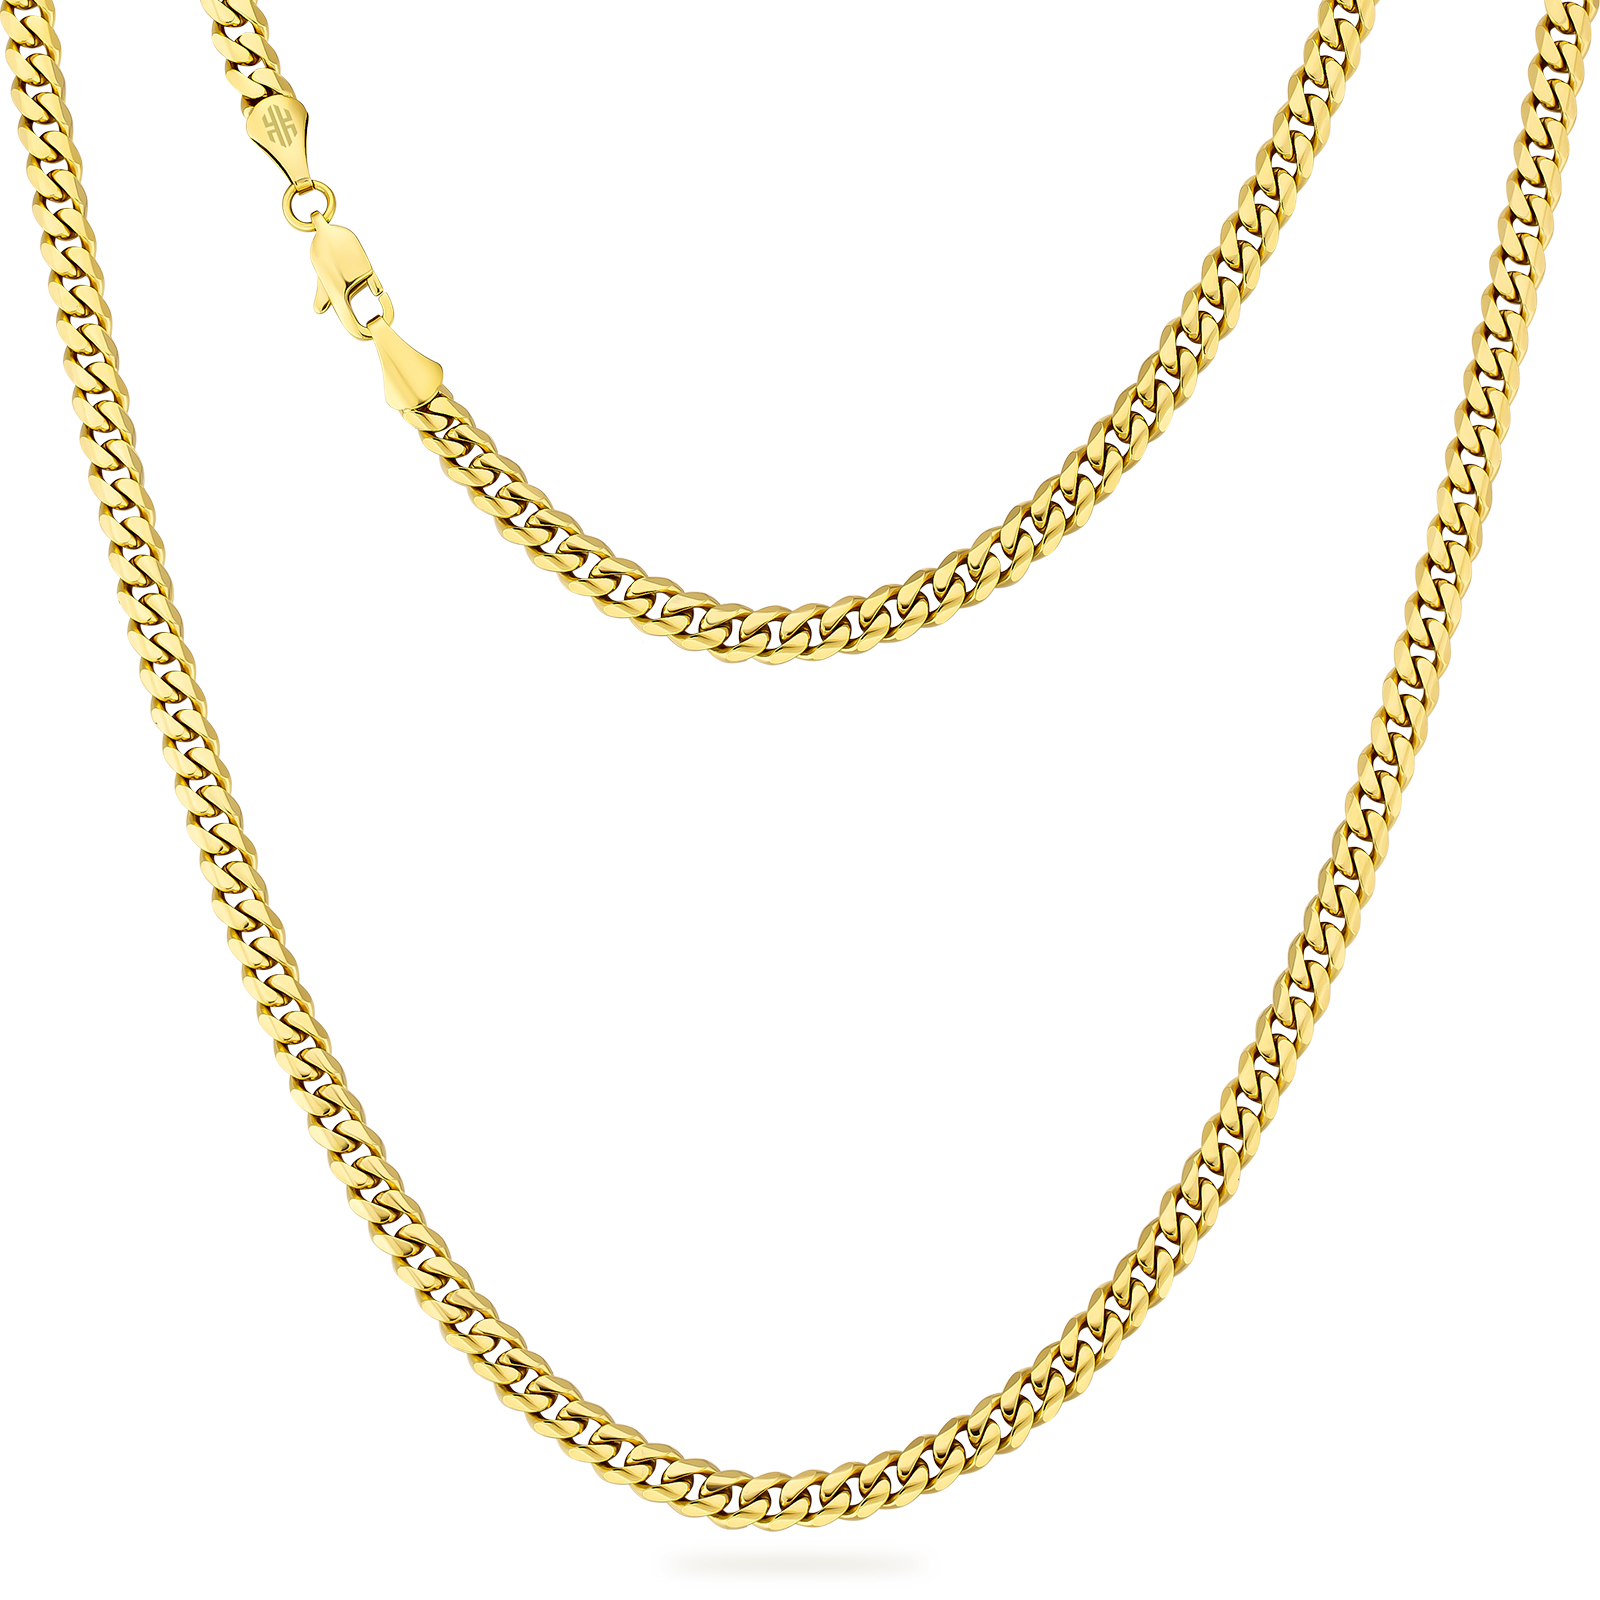 NEW】14k 喜平 ネックレス メンズ 幅3mm/4mm/5mm/6mm/8mm curb chain 